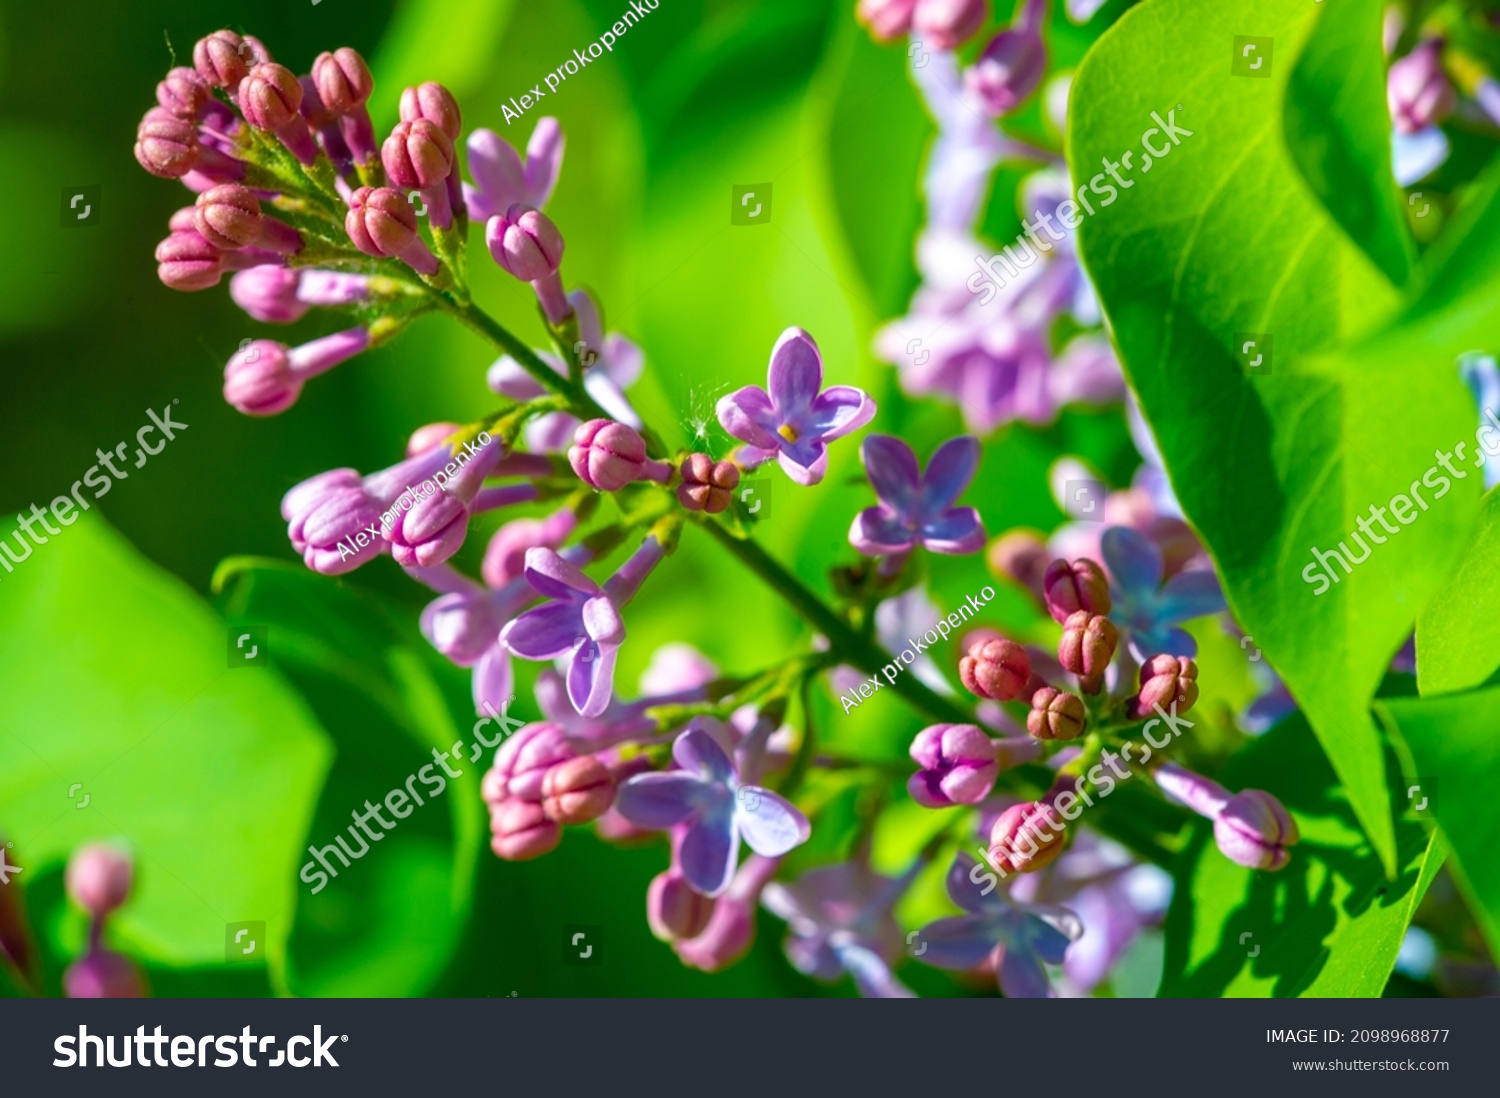 Lilacs Since lilacs have one of the earliest flowering periods, they symbolize spring and renewal. The flower also symbolizes confidence, making it a traditionally popular gift for graduates. #2098968877